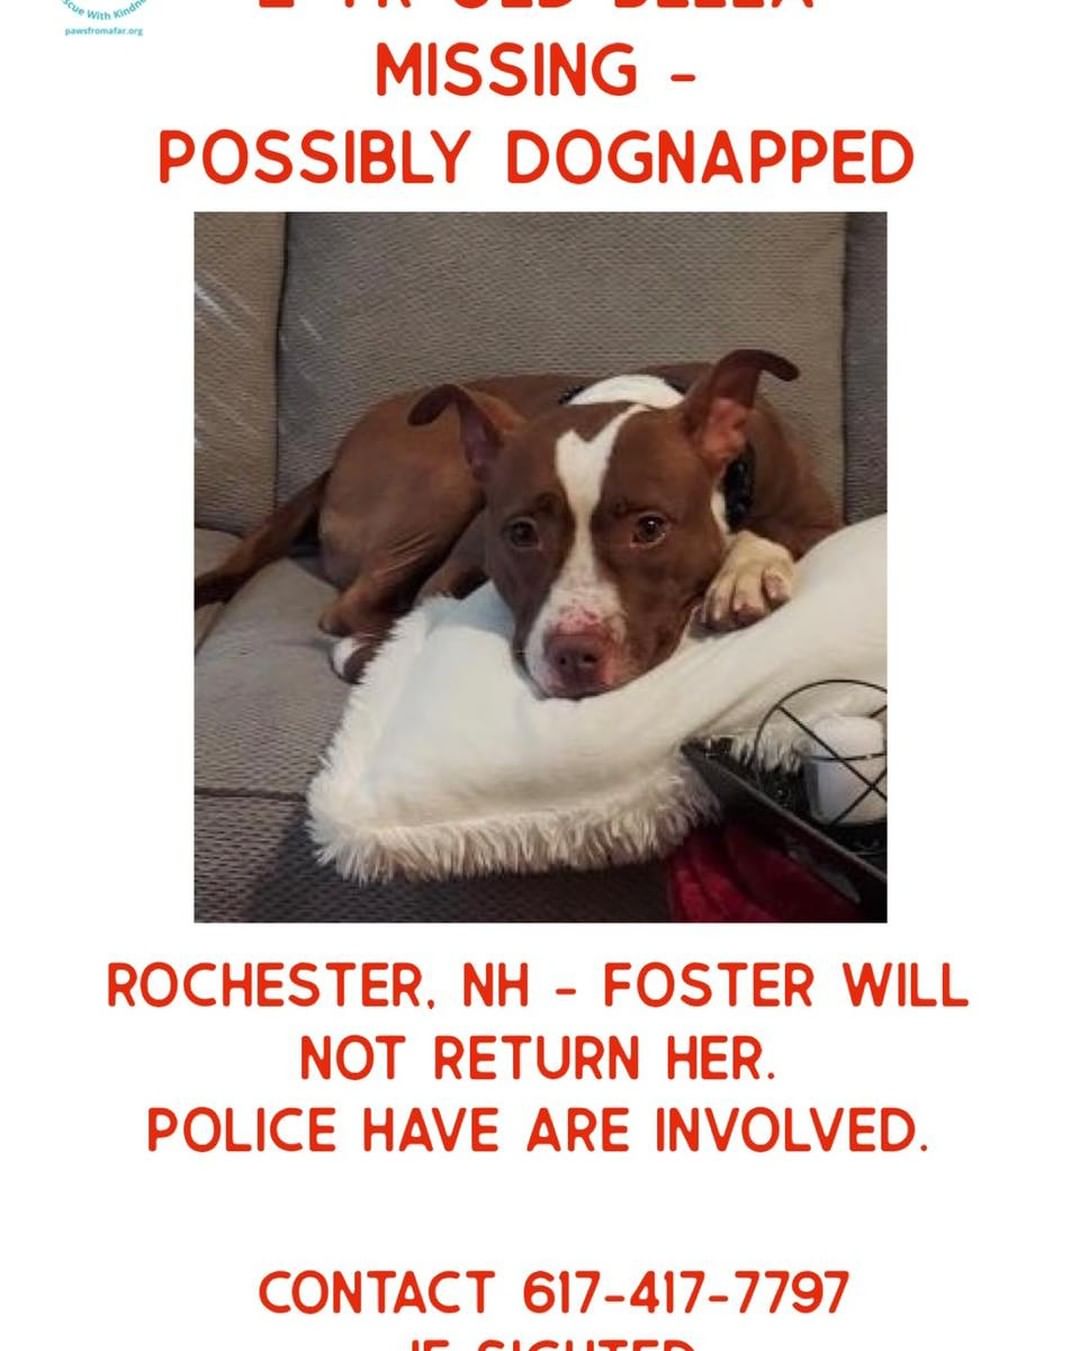 PLEASE SHARE, this is one of our foster babies 💔💔💔💔